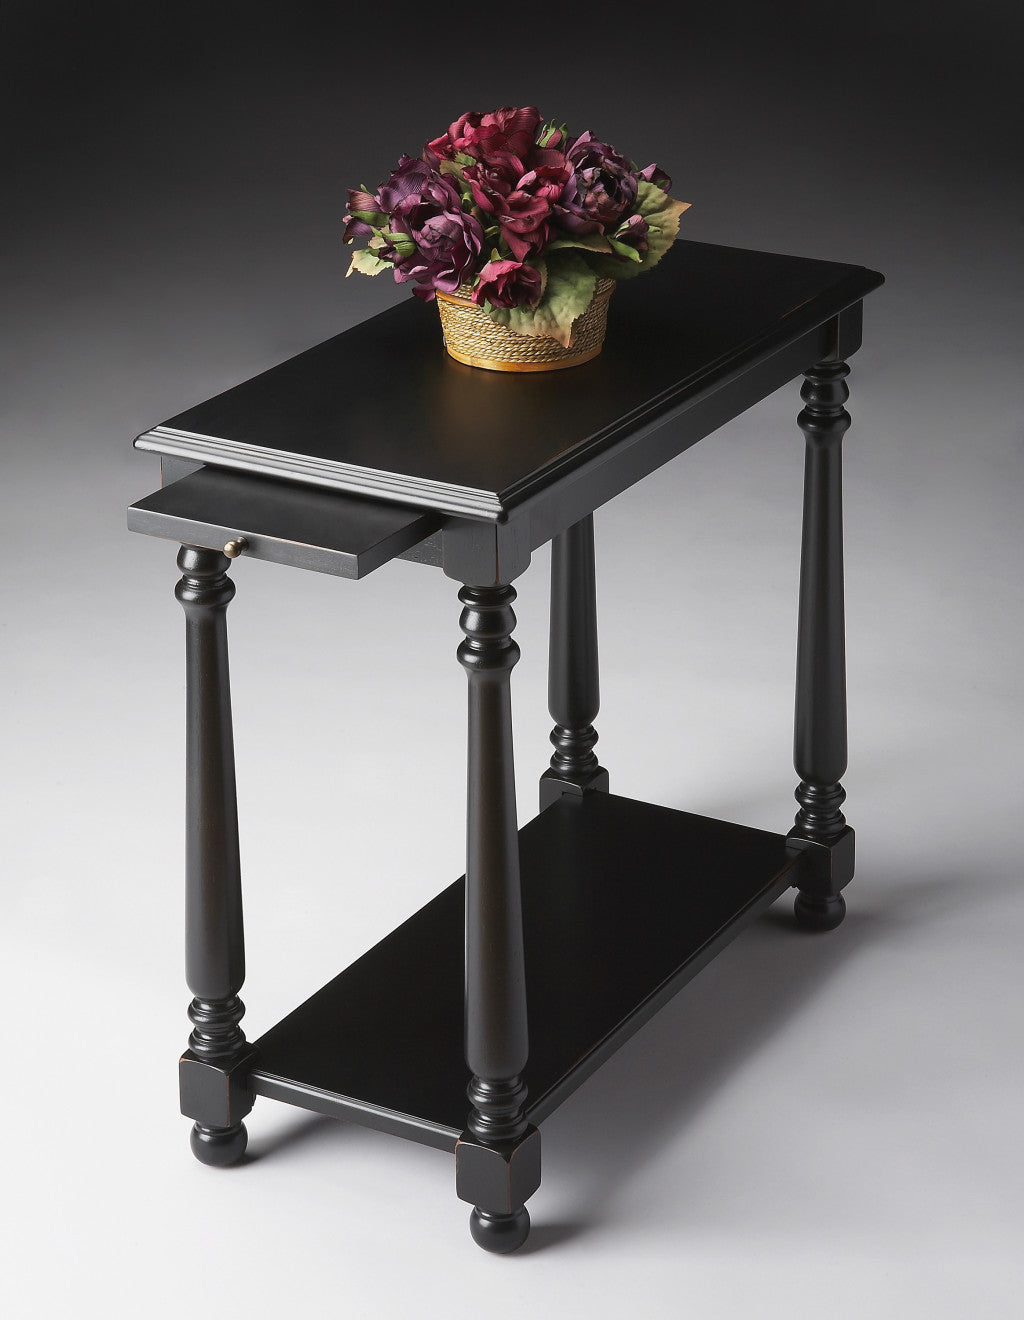 24’ Black Manufactured Wood Rectangular End Table With Shelf - End-Side Tables